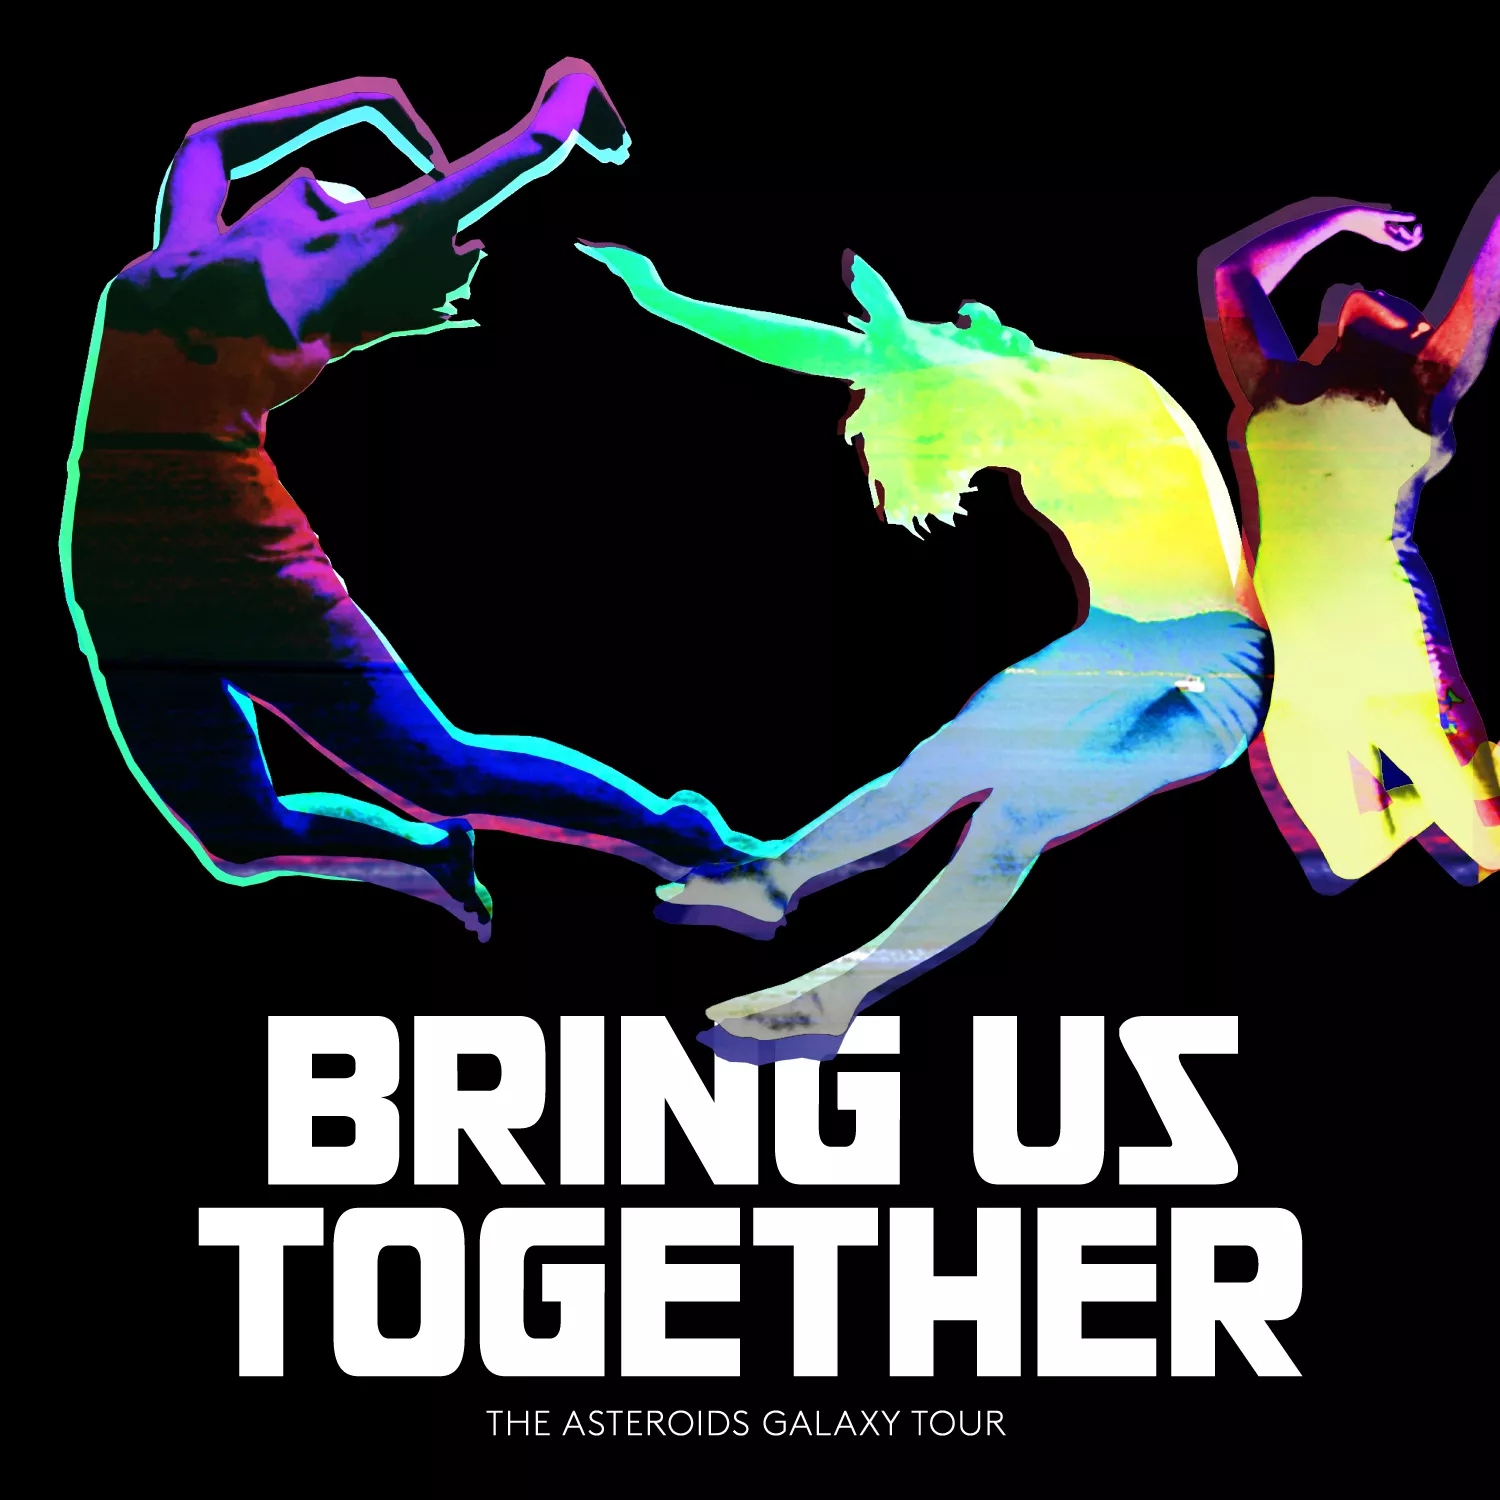 Bring Us Together - The Asteroids Galaxy Tour